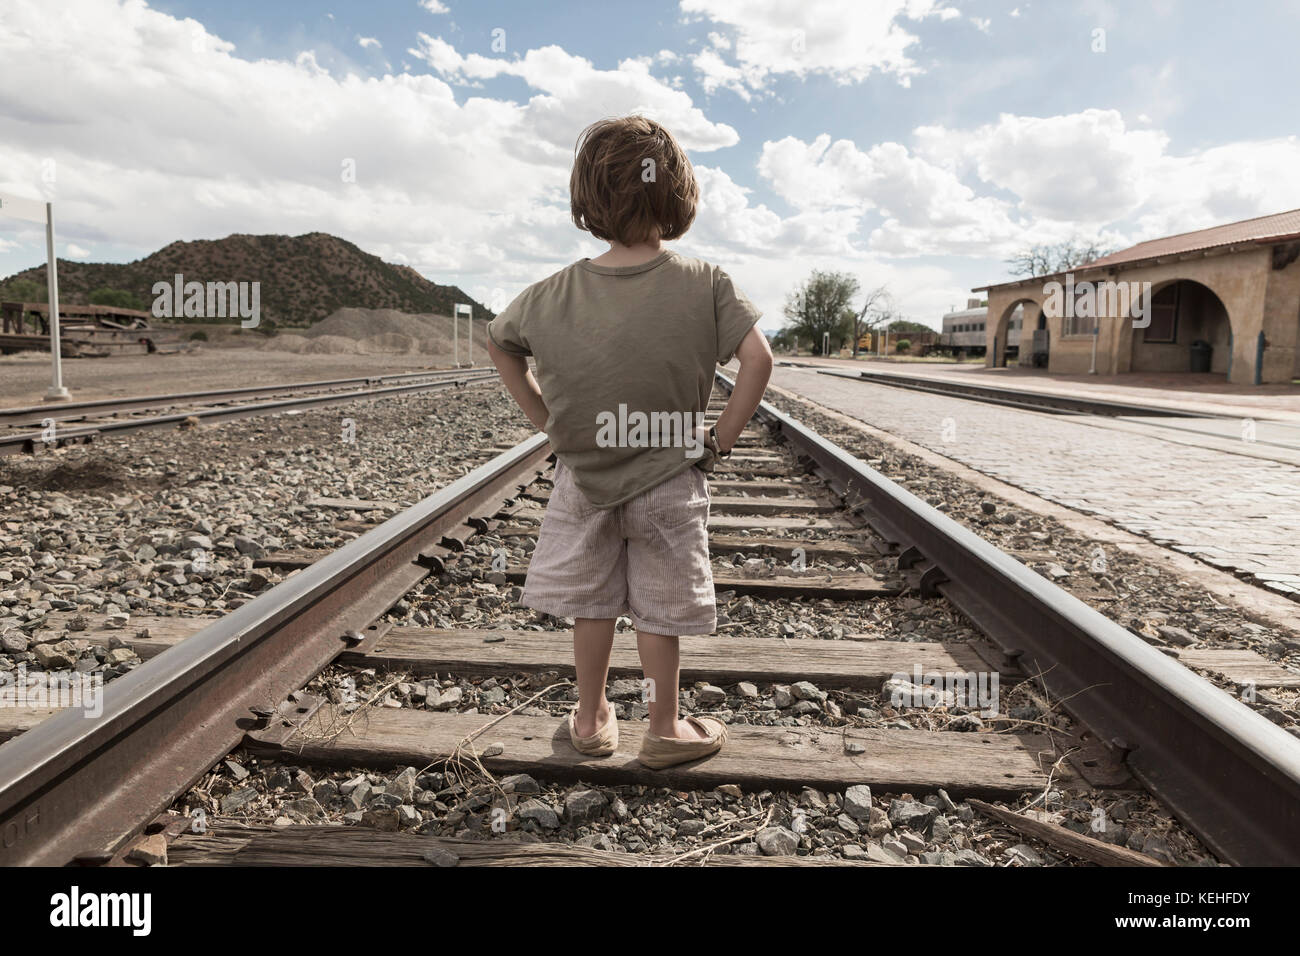 Caucasian boy standing with hands on hips on train track Stock Photo